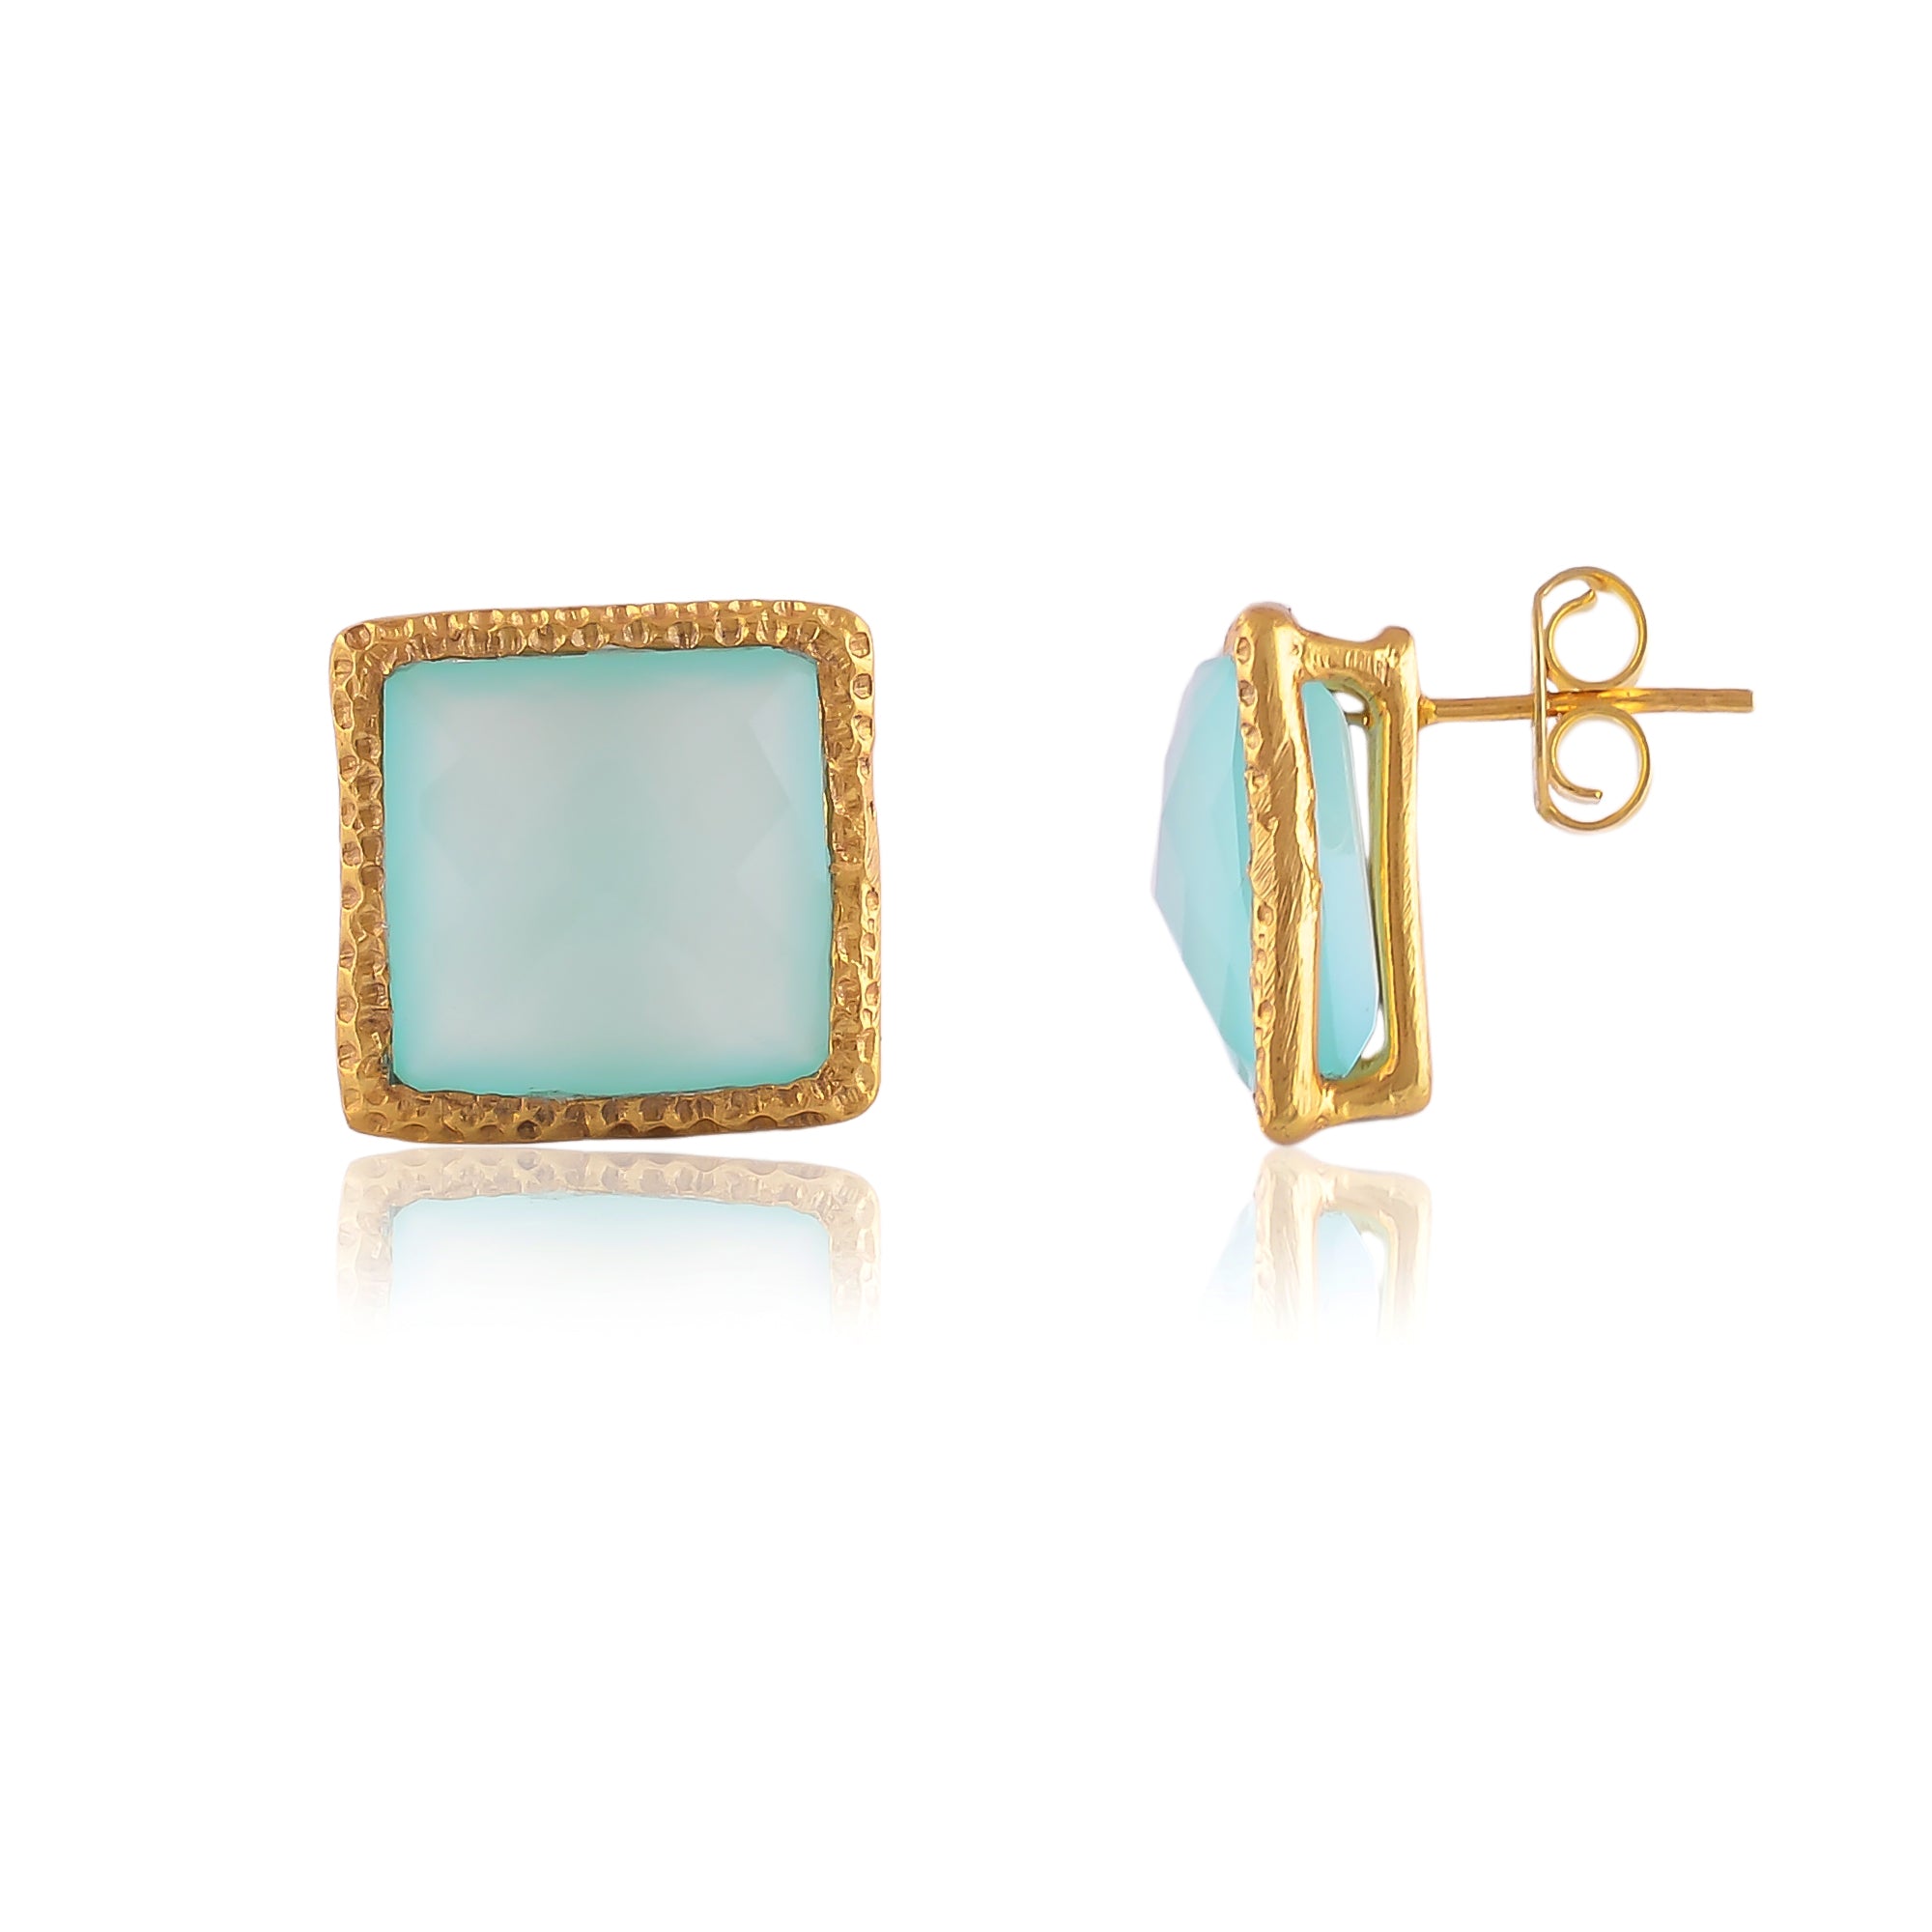 Buy Handmade Silver Gold Plated Chalcedony Stud Earring